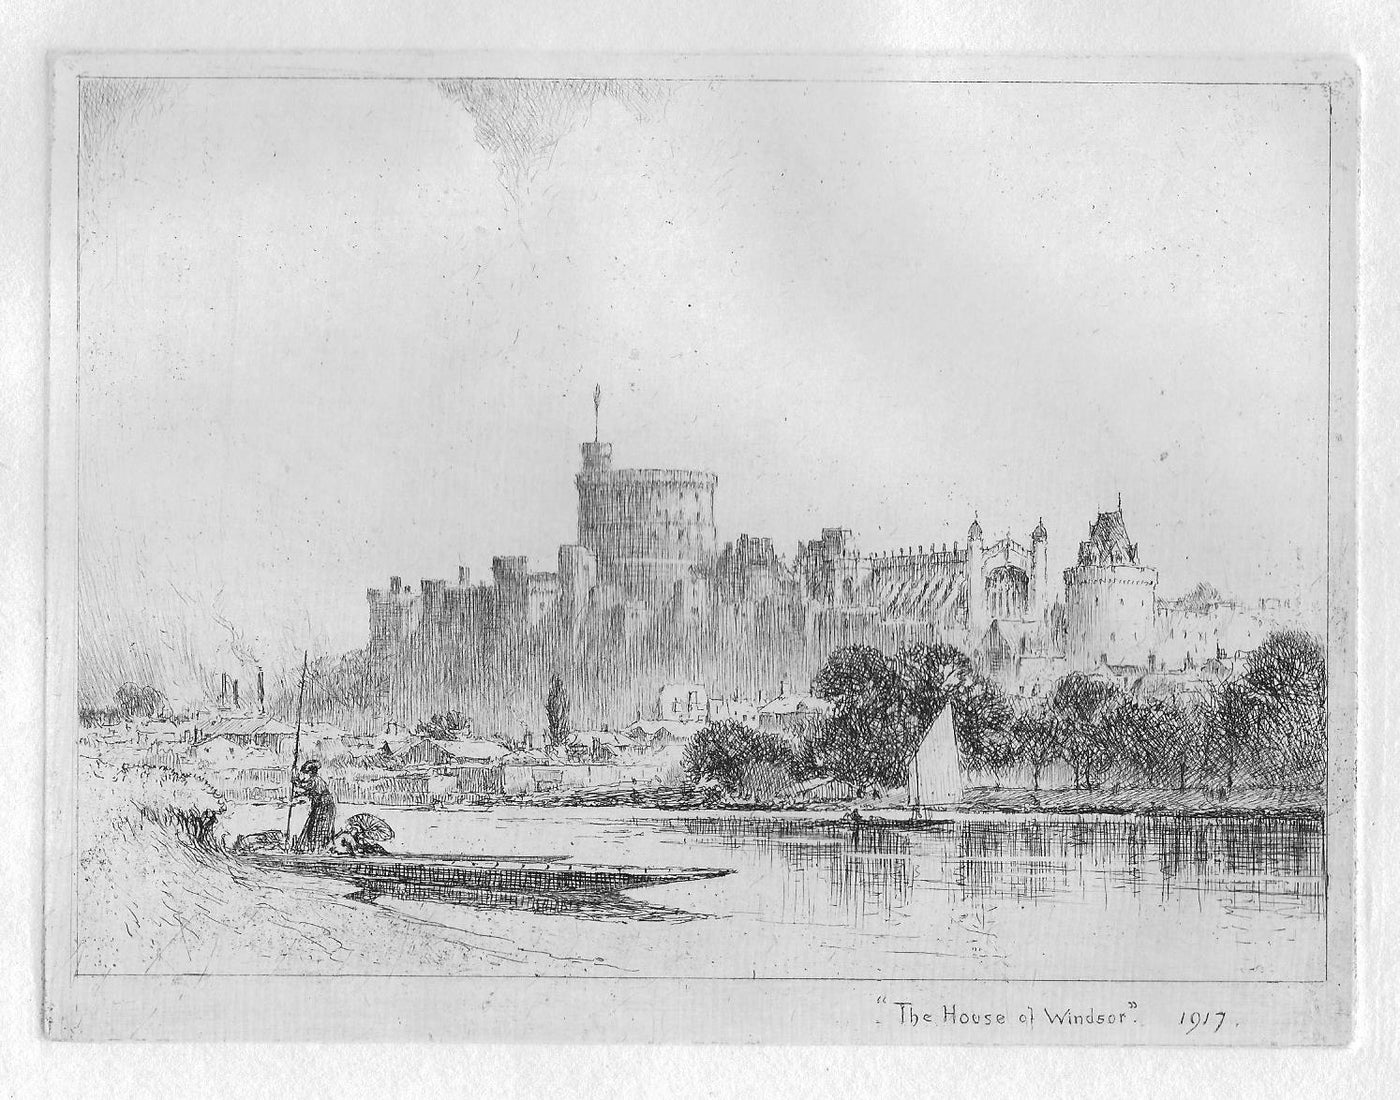 Windsor Castle, Berkshire, 1917. Vintage etching by Percy Robertson. Published 1930